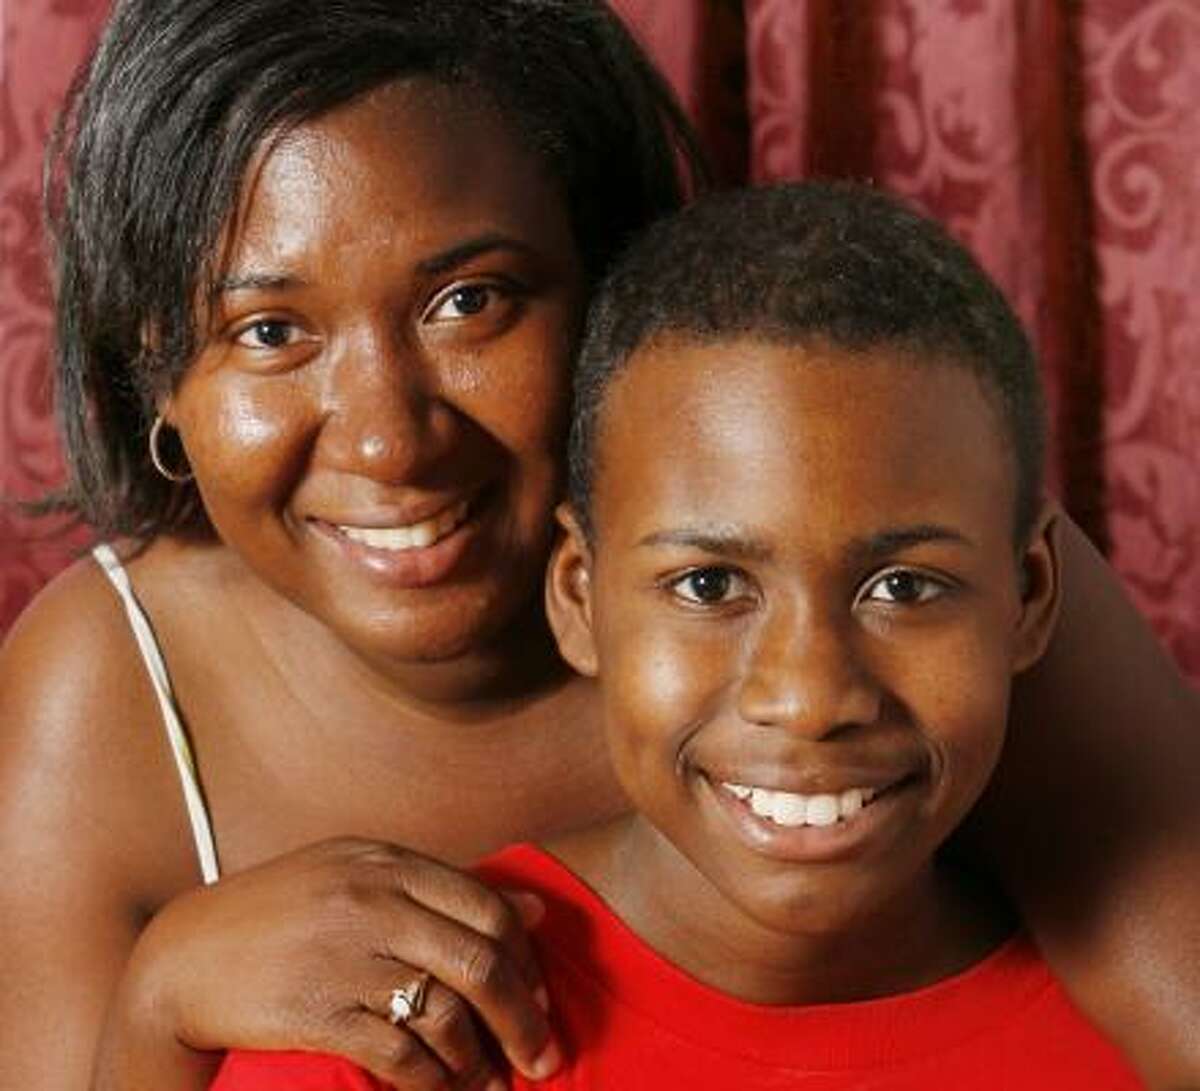 Tamika Scott is shown in 2006 with her son, Devante Johnson, 13, who lost health coverage for four months after a Medicaid paperwork error.